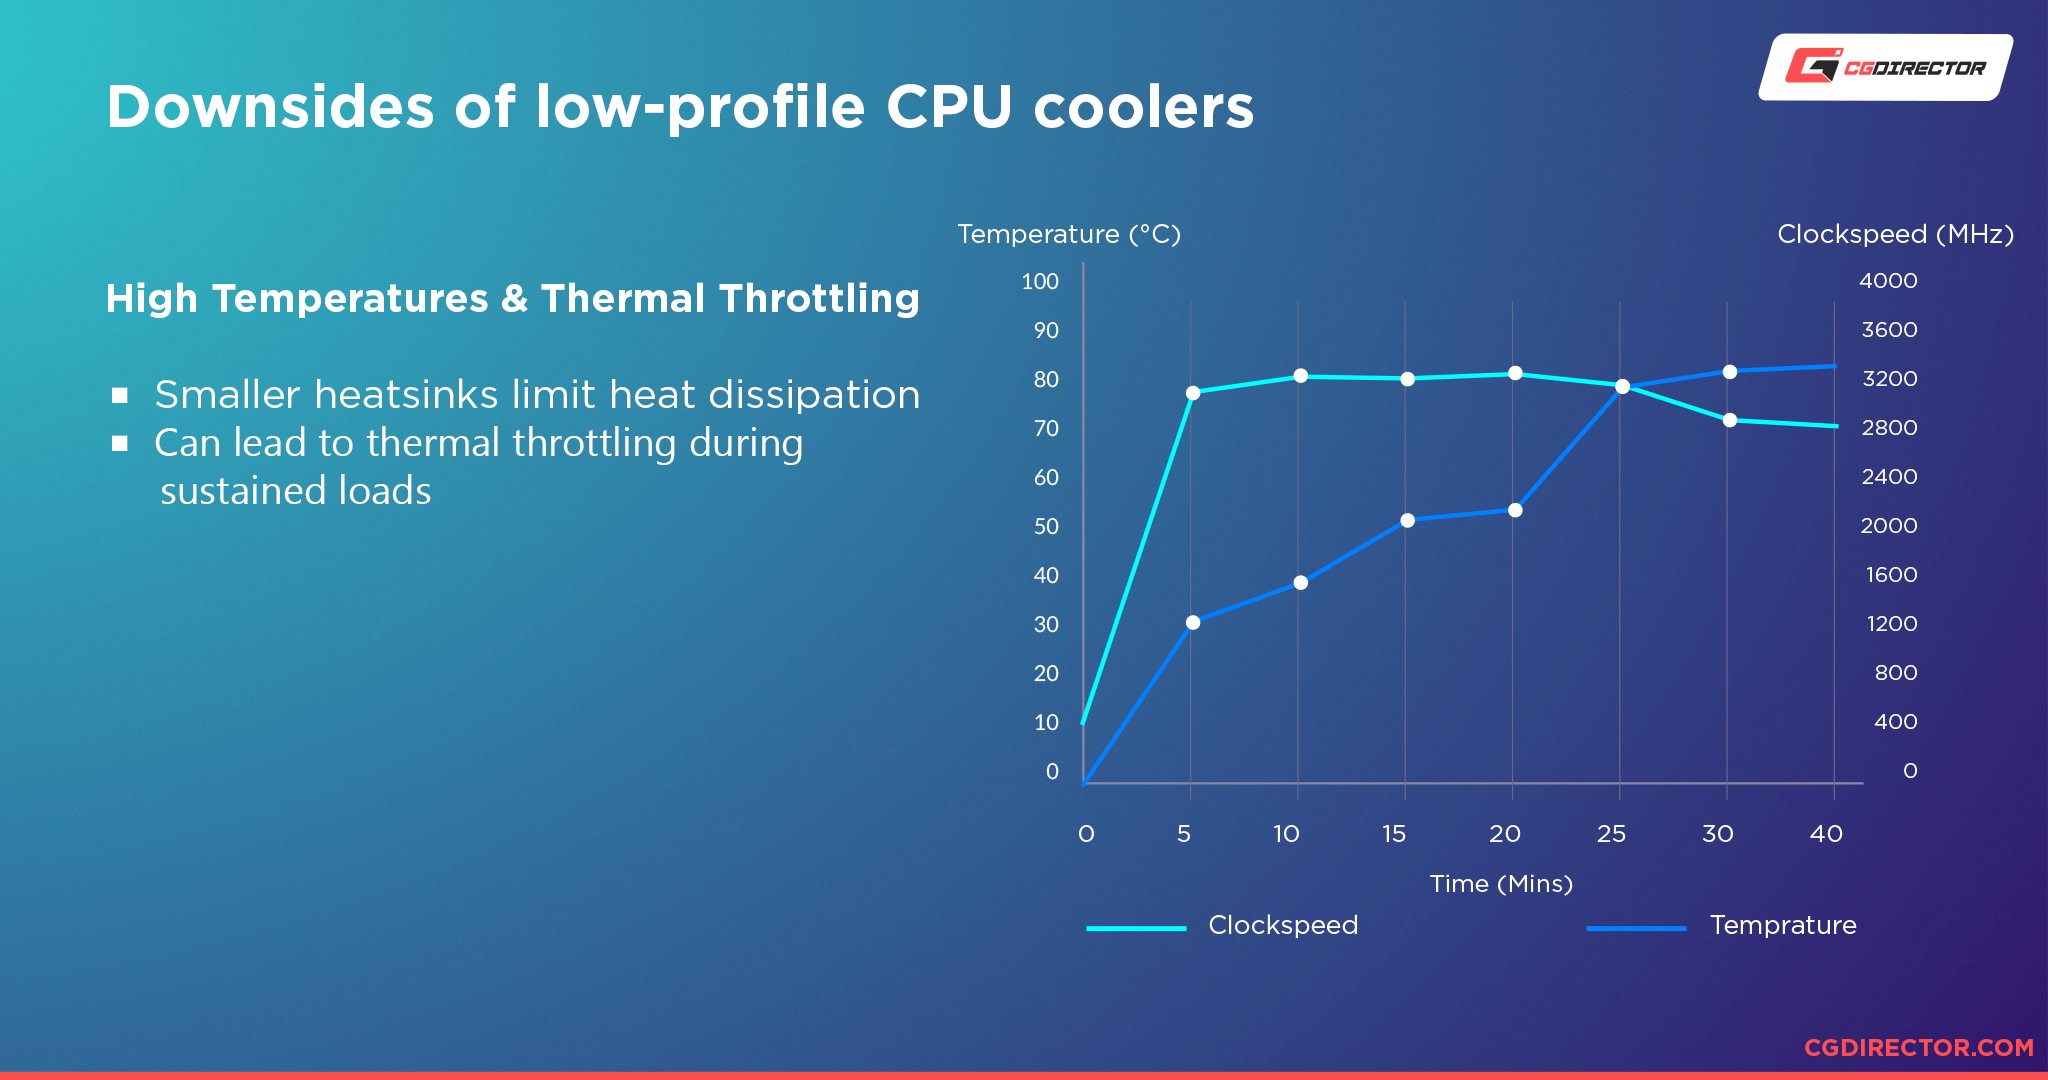 The downsides of a low-profile CPU cooler